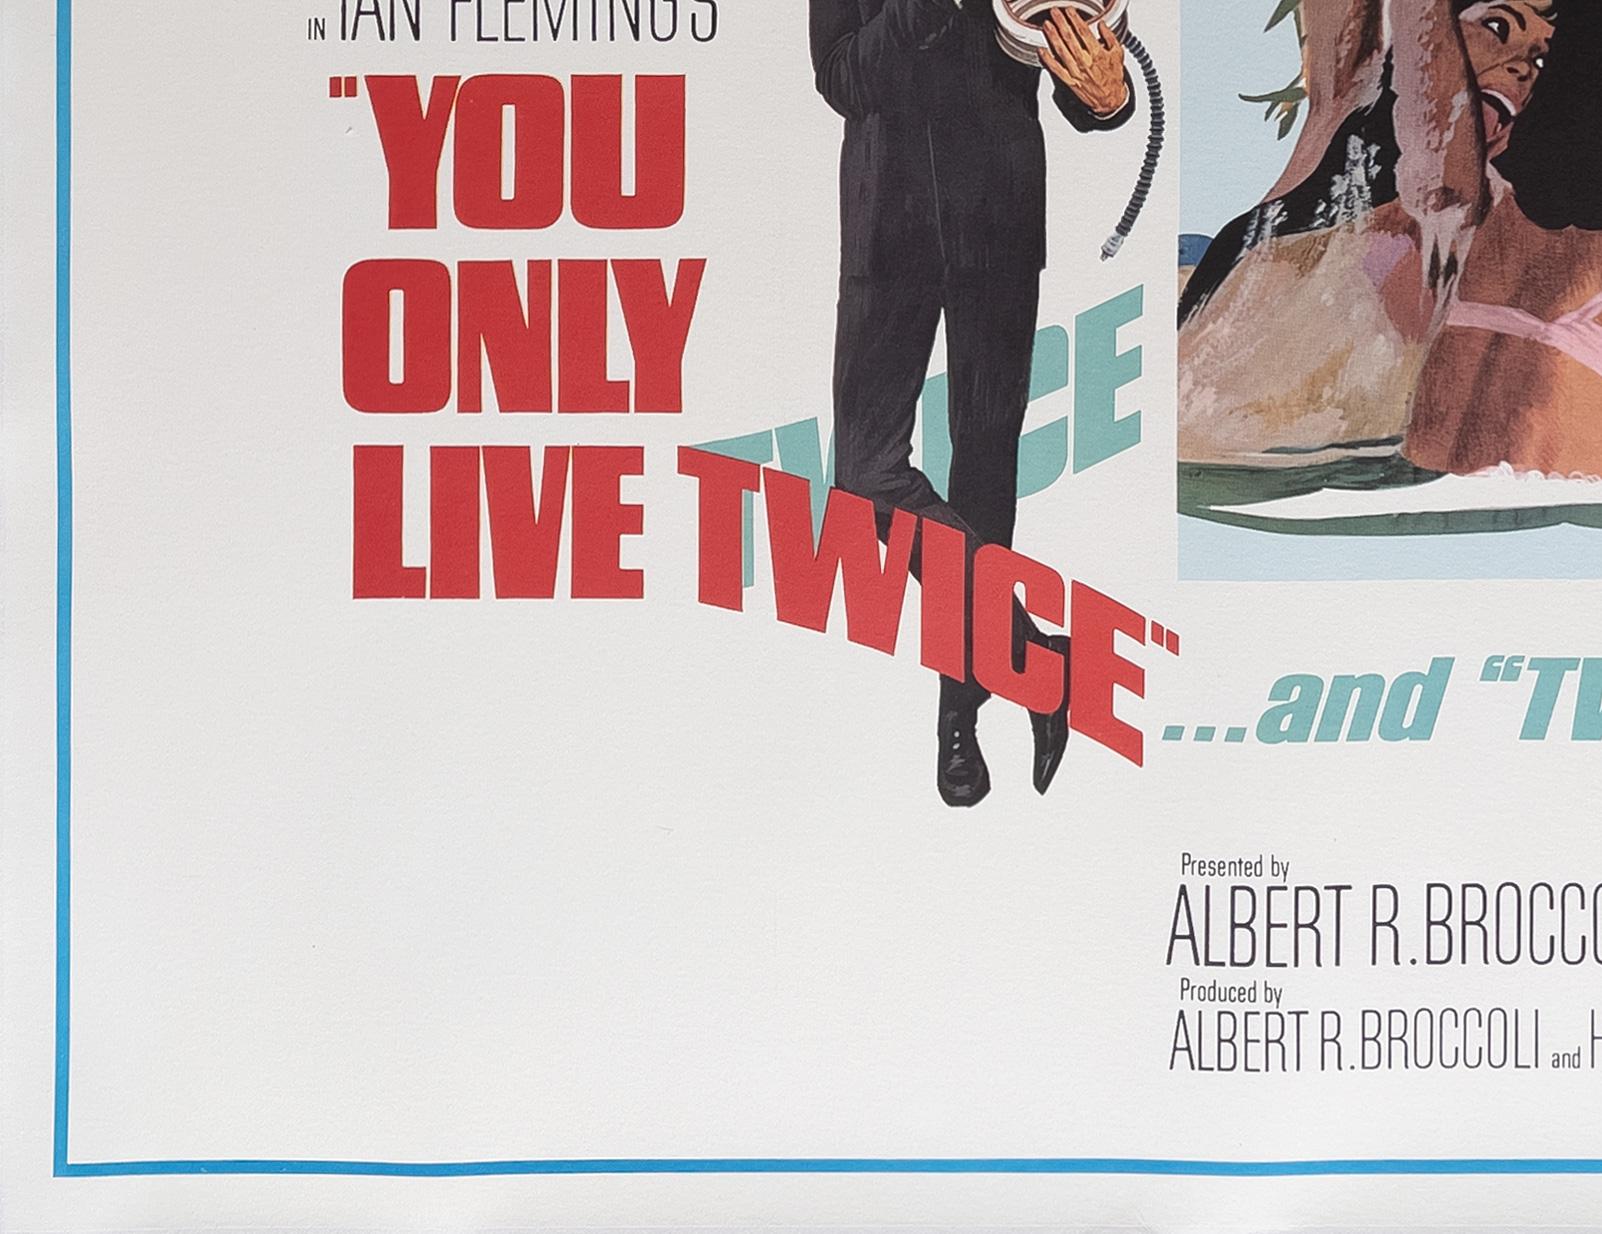 james bond you only live twice